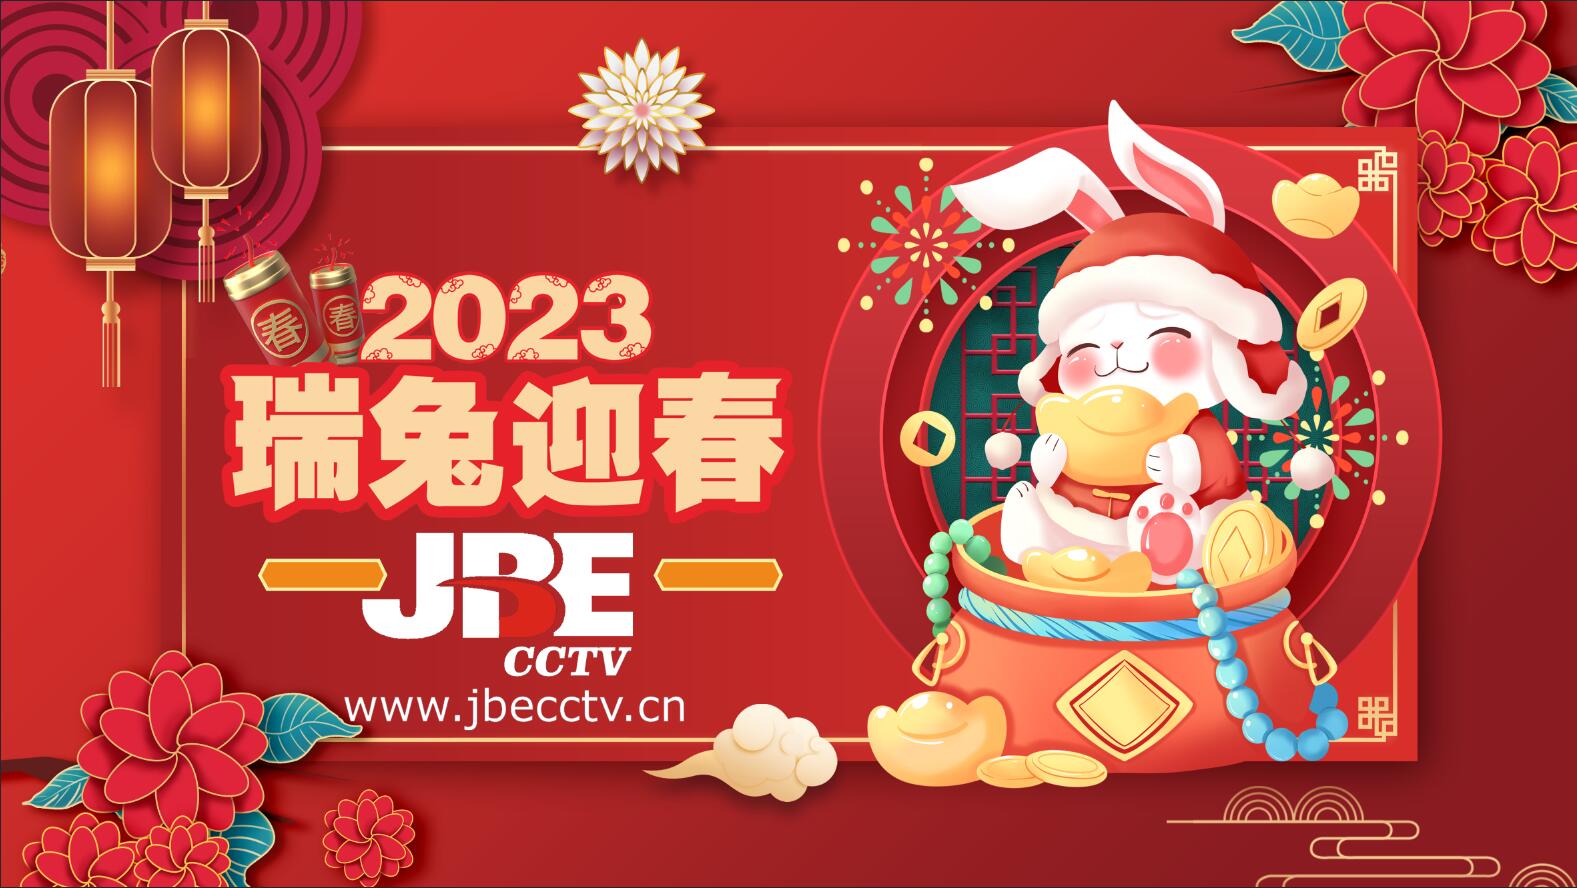 CHINESE NEW YEAR NOTICES 2023!